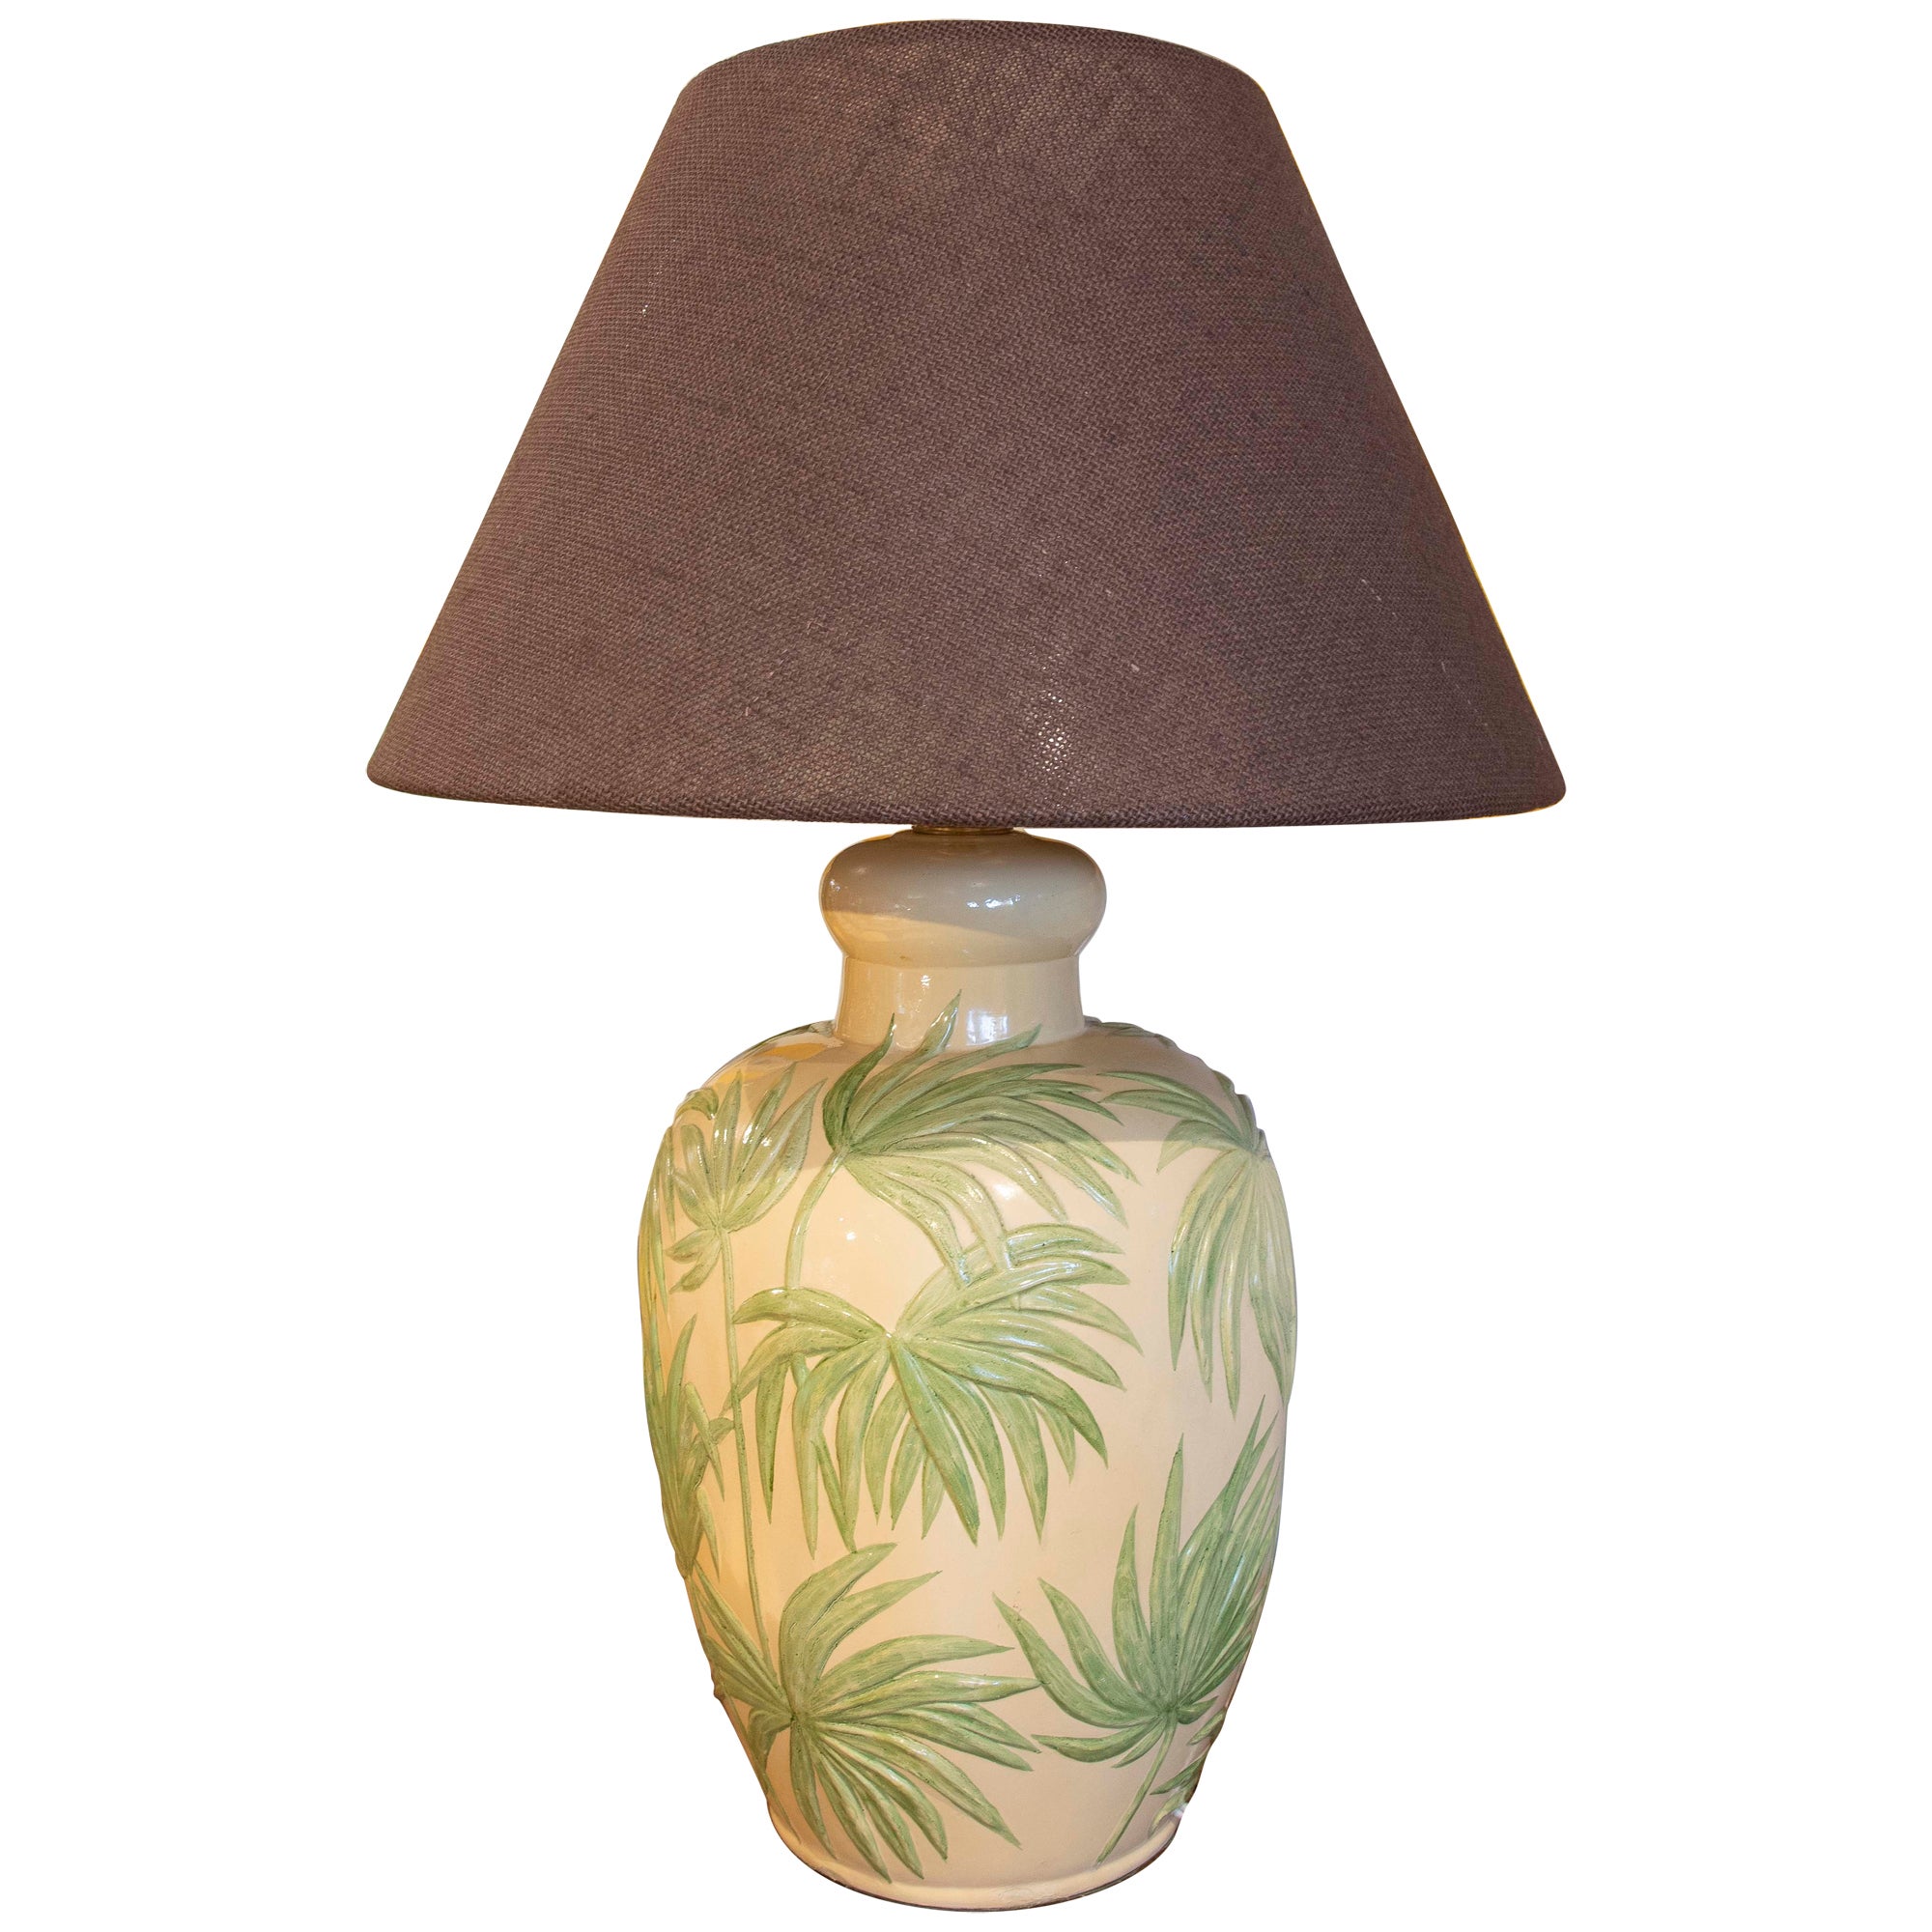 1970s Ceramic Lamp with Palm Tree Decoration  For Sale